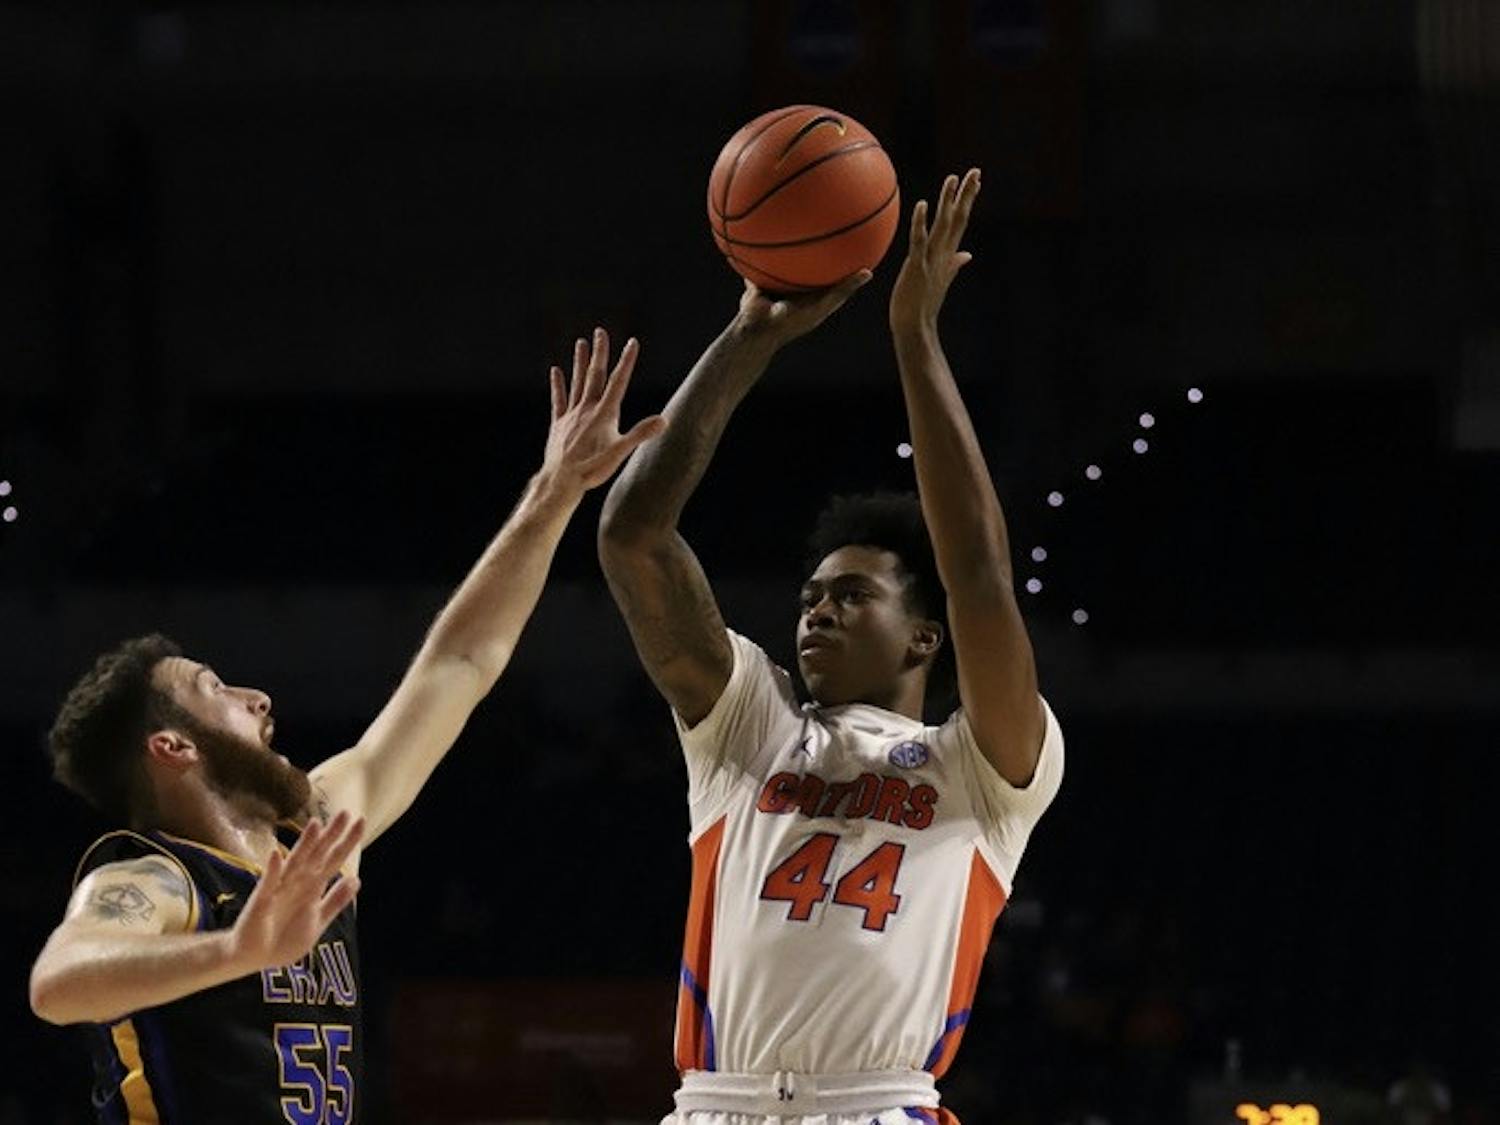 Florida's Niels Lane goes up for a shot in an exhibition match against Embry-Riddle on Nov. 1.